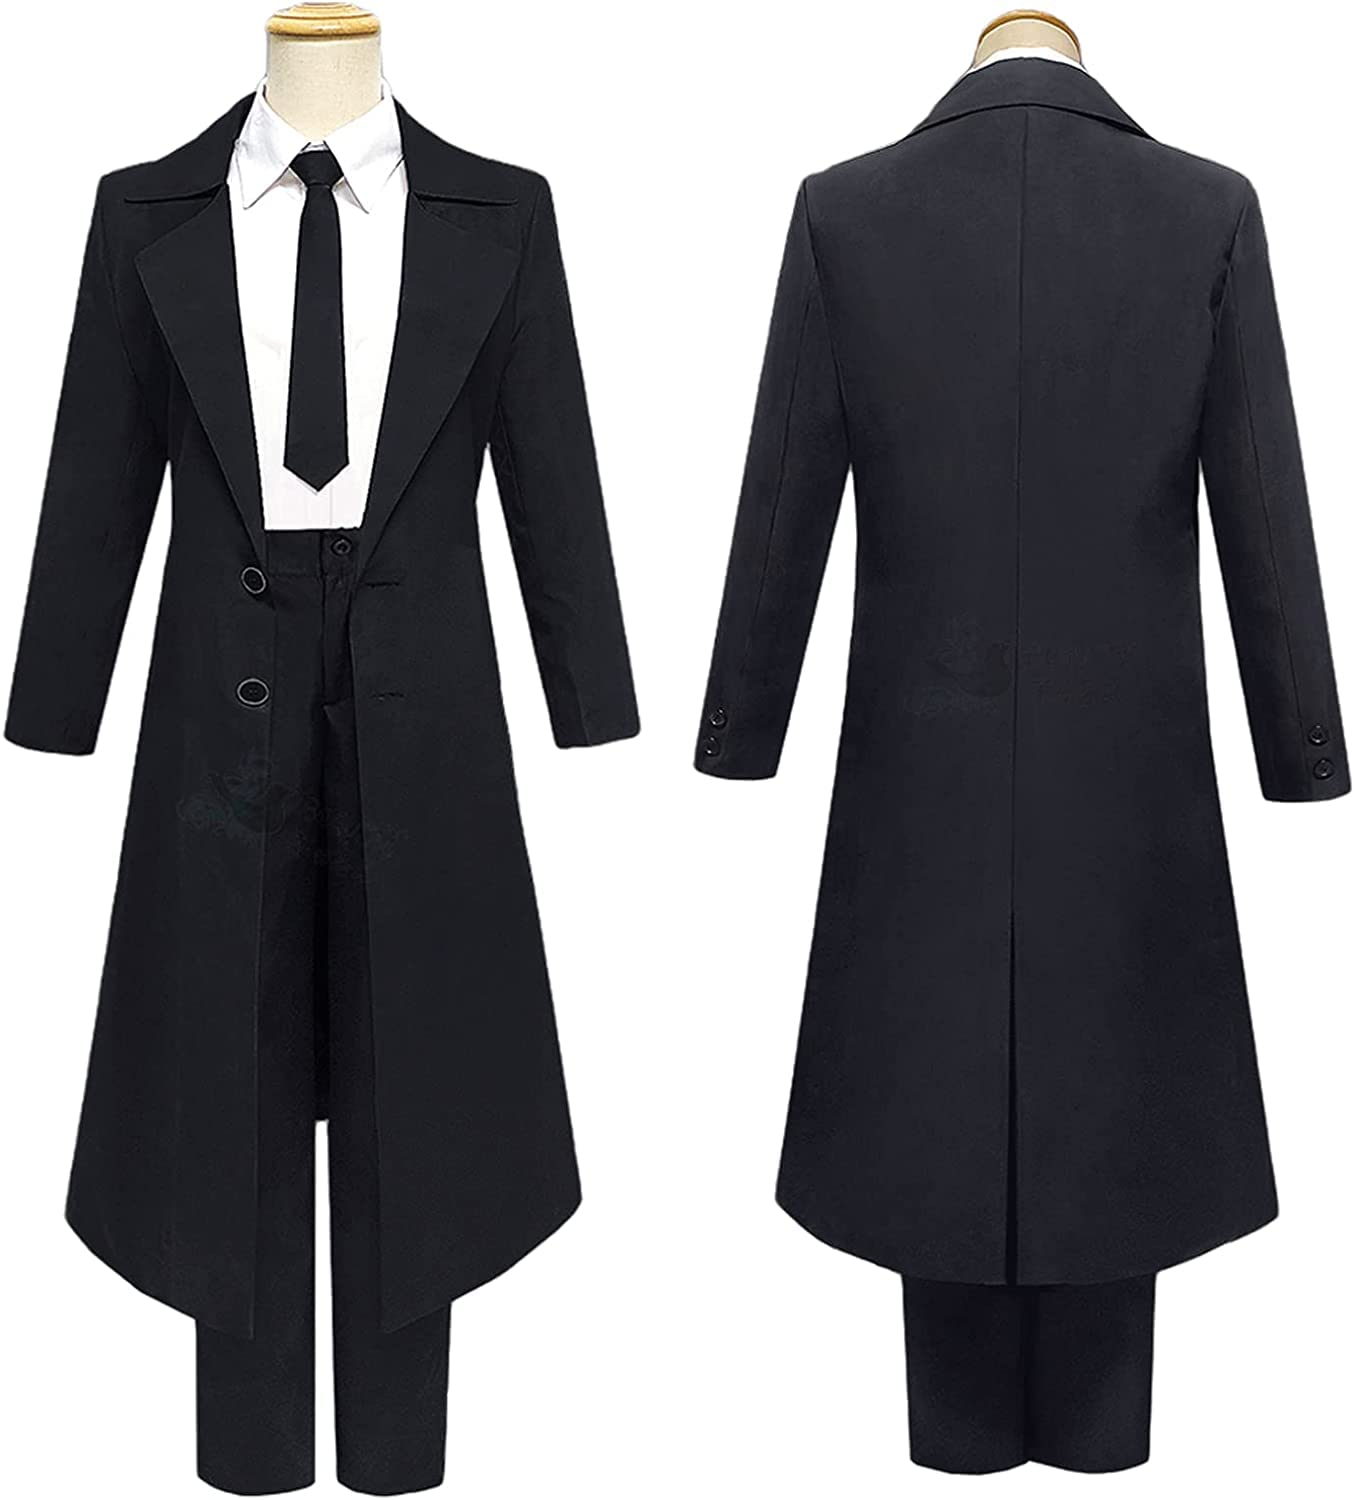 Cheap Anime Bungo Stray Dogs Dazai Osamu Cosplay Costume Black Trench  Outfit Jacket Anime Men Adult Halloween Christmas Suits Coat | Joom